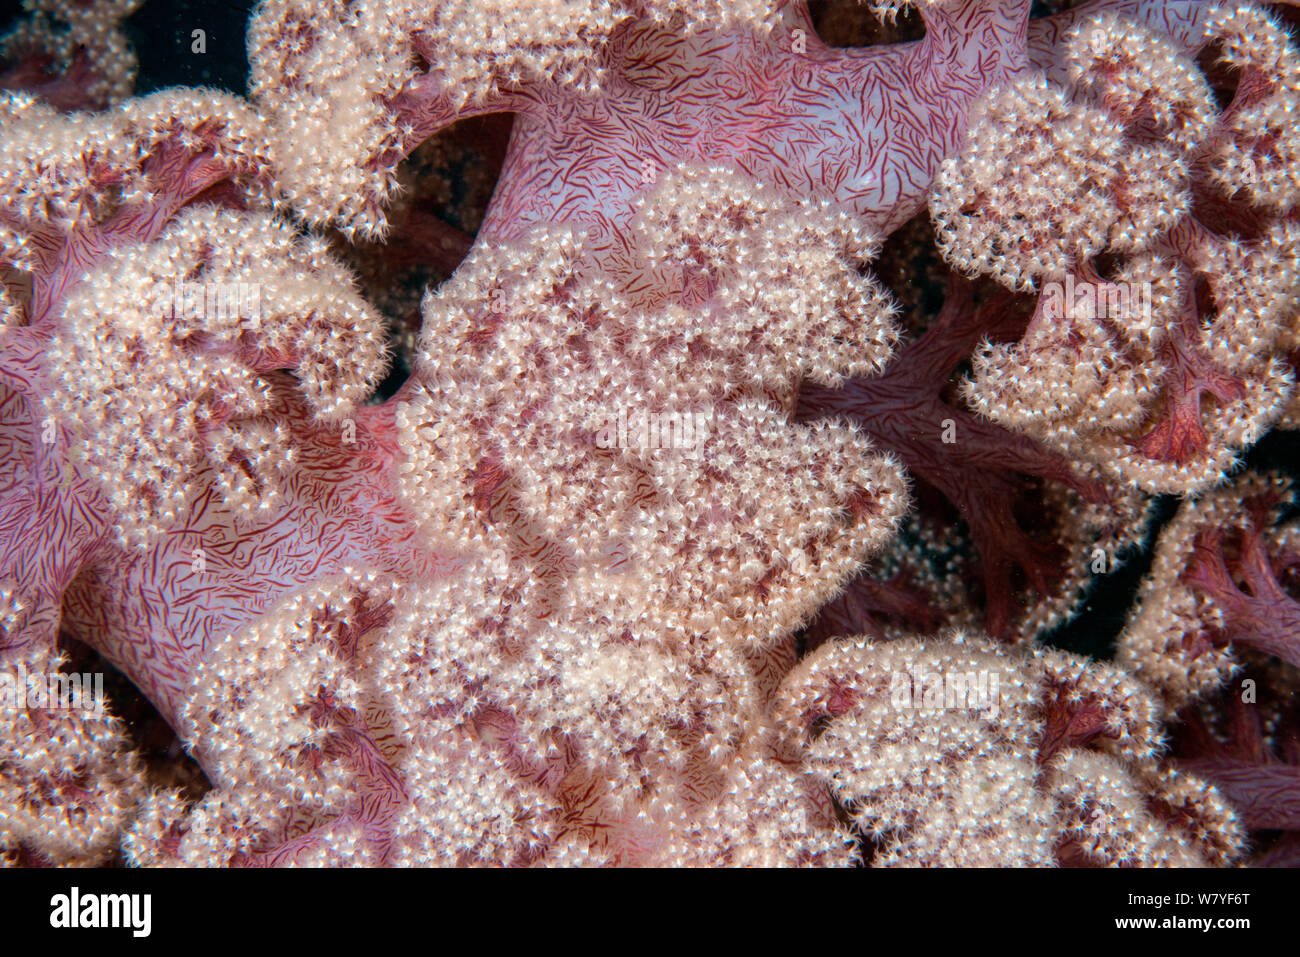 Red soft coral (Dendronephthya sp.) close up. Lembeh Strait, North Sulawesi, Indonesia. Stock Photo